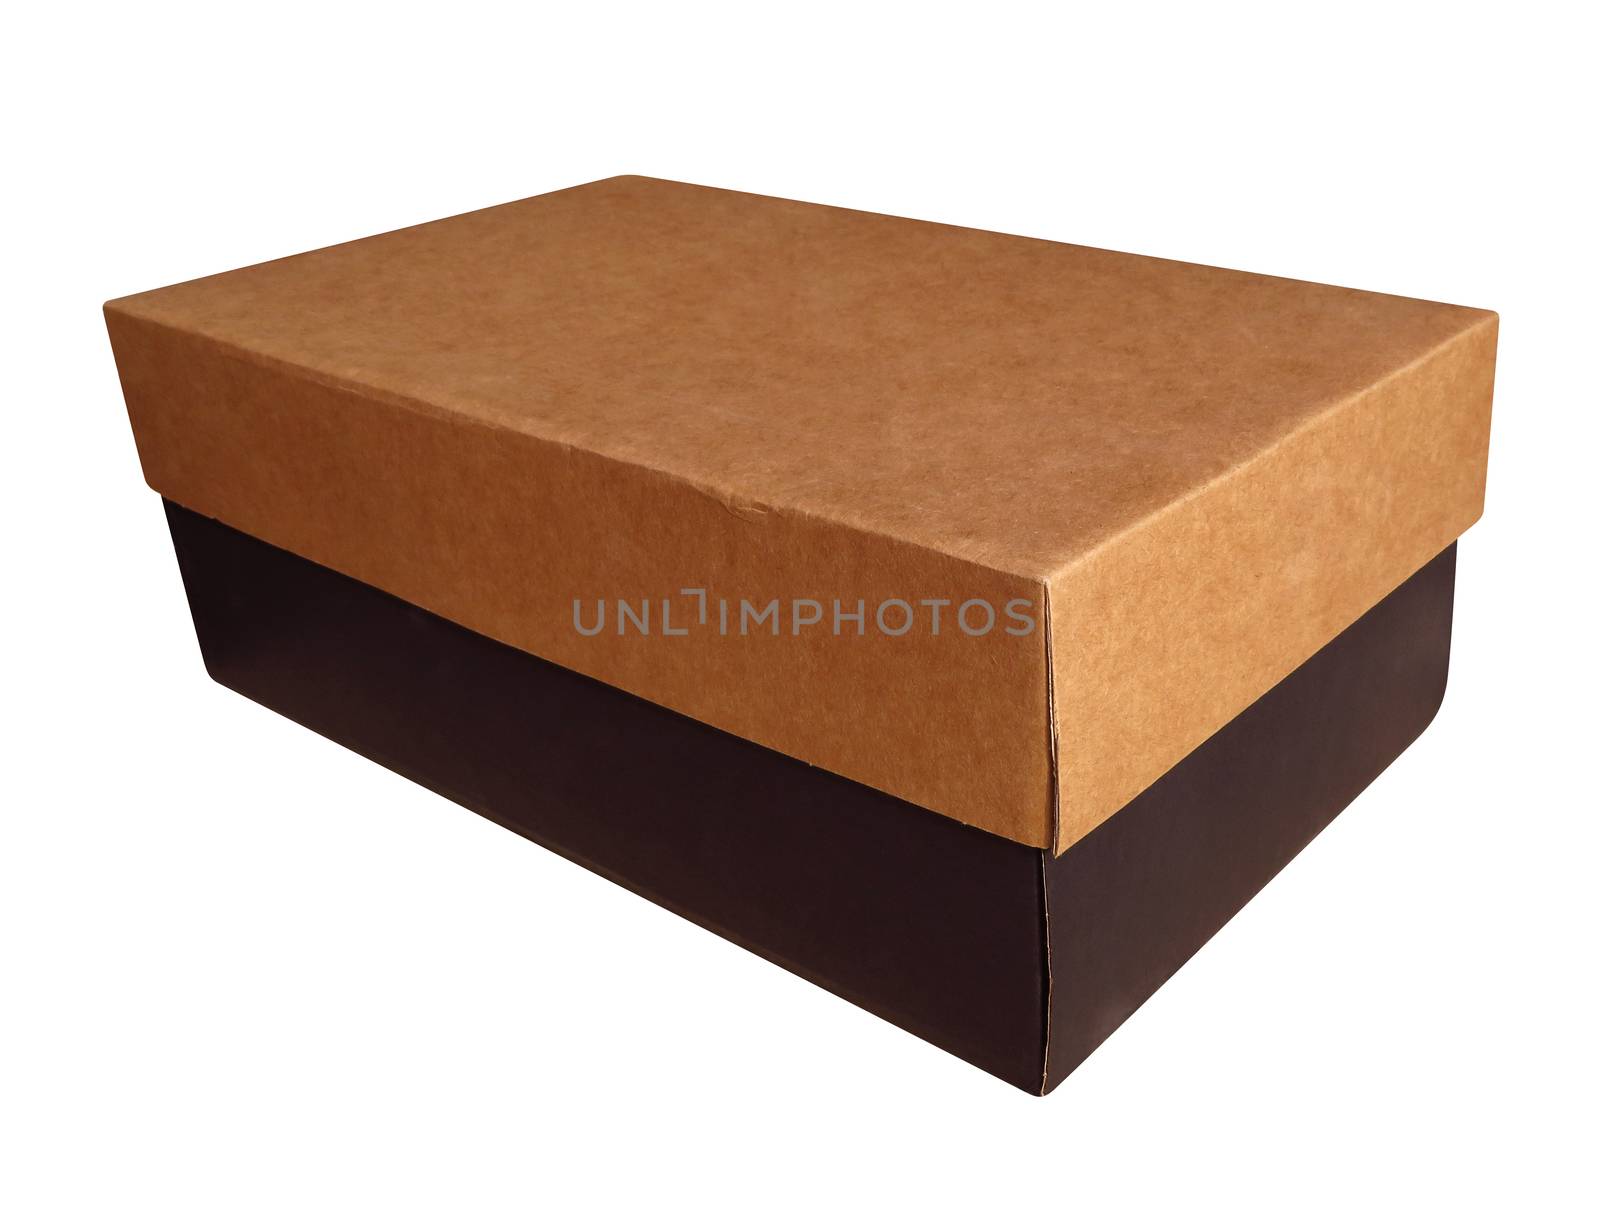 Cardboard box, isolated on white background. Clipping Path included.